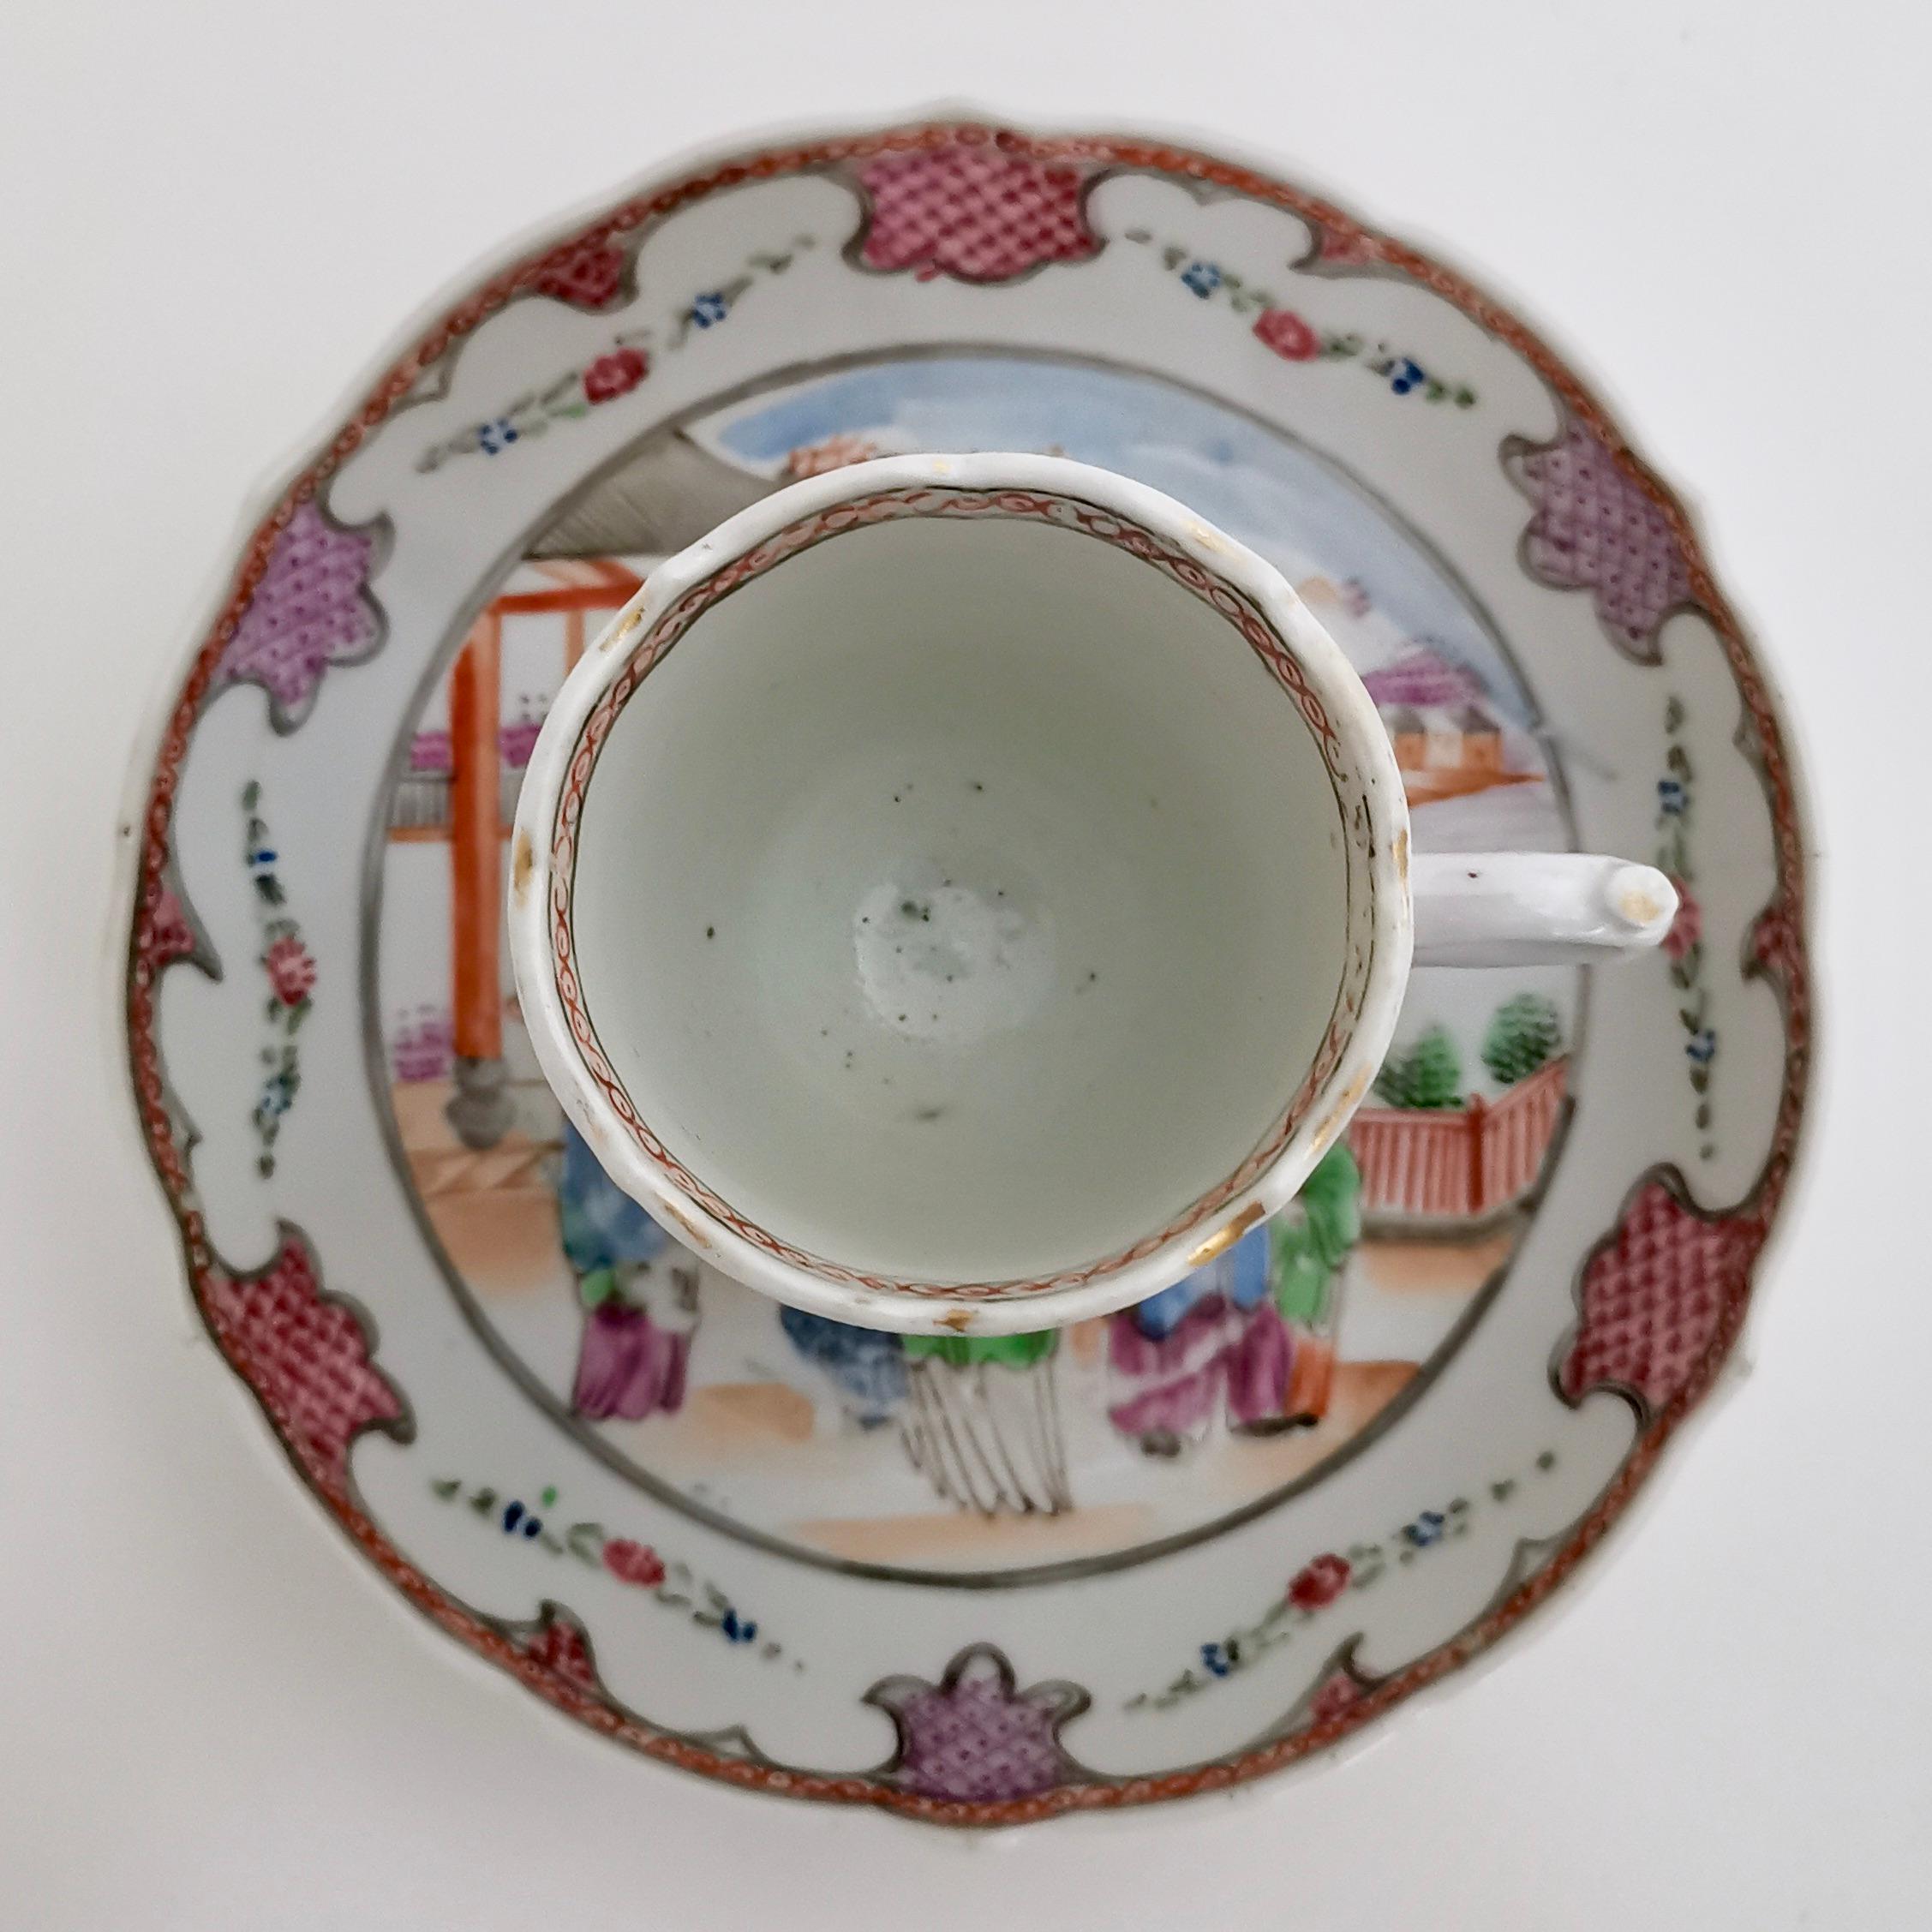 Porcelain Chinese Export Cup and Saucer, London Decorated Qianlong, 1760-1780